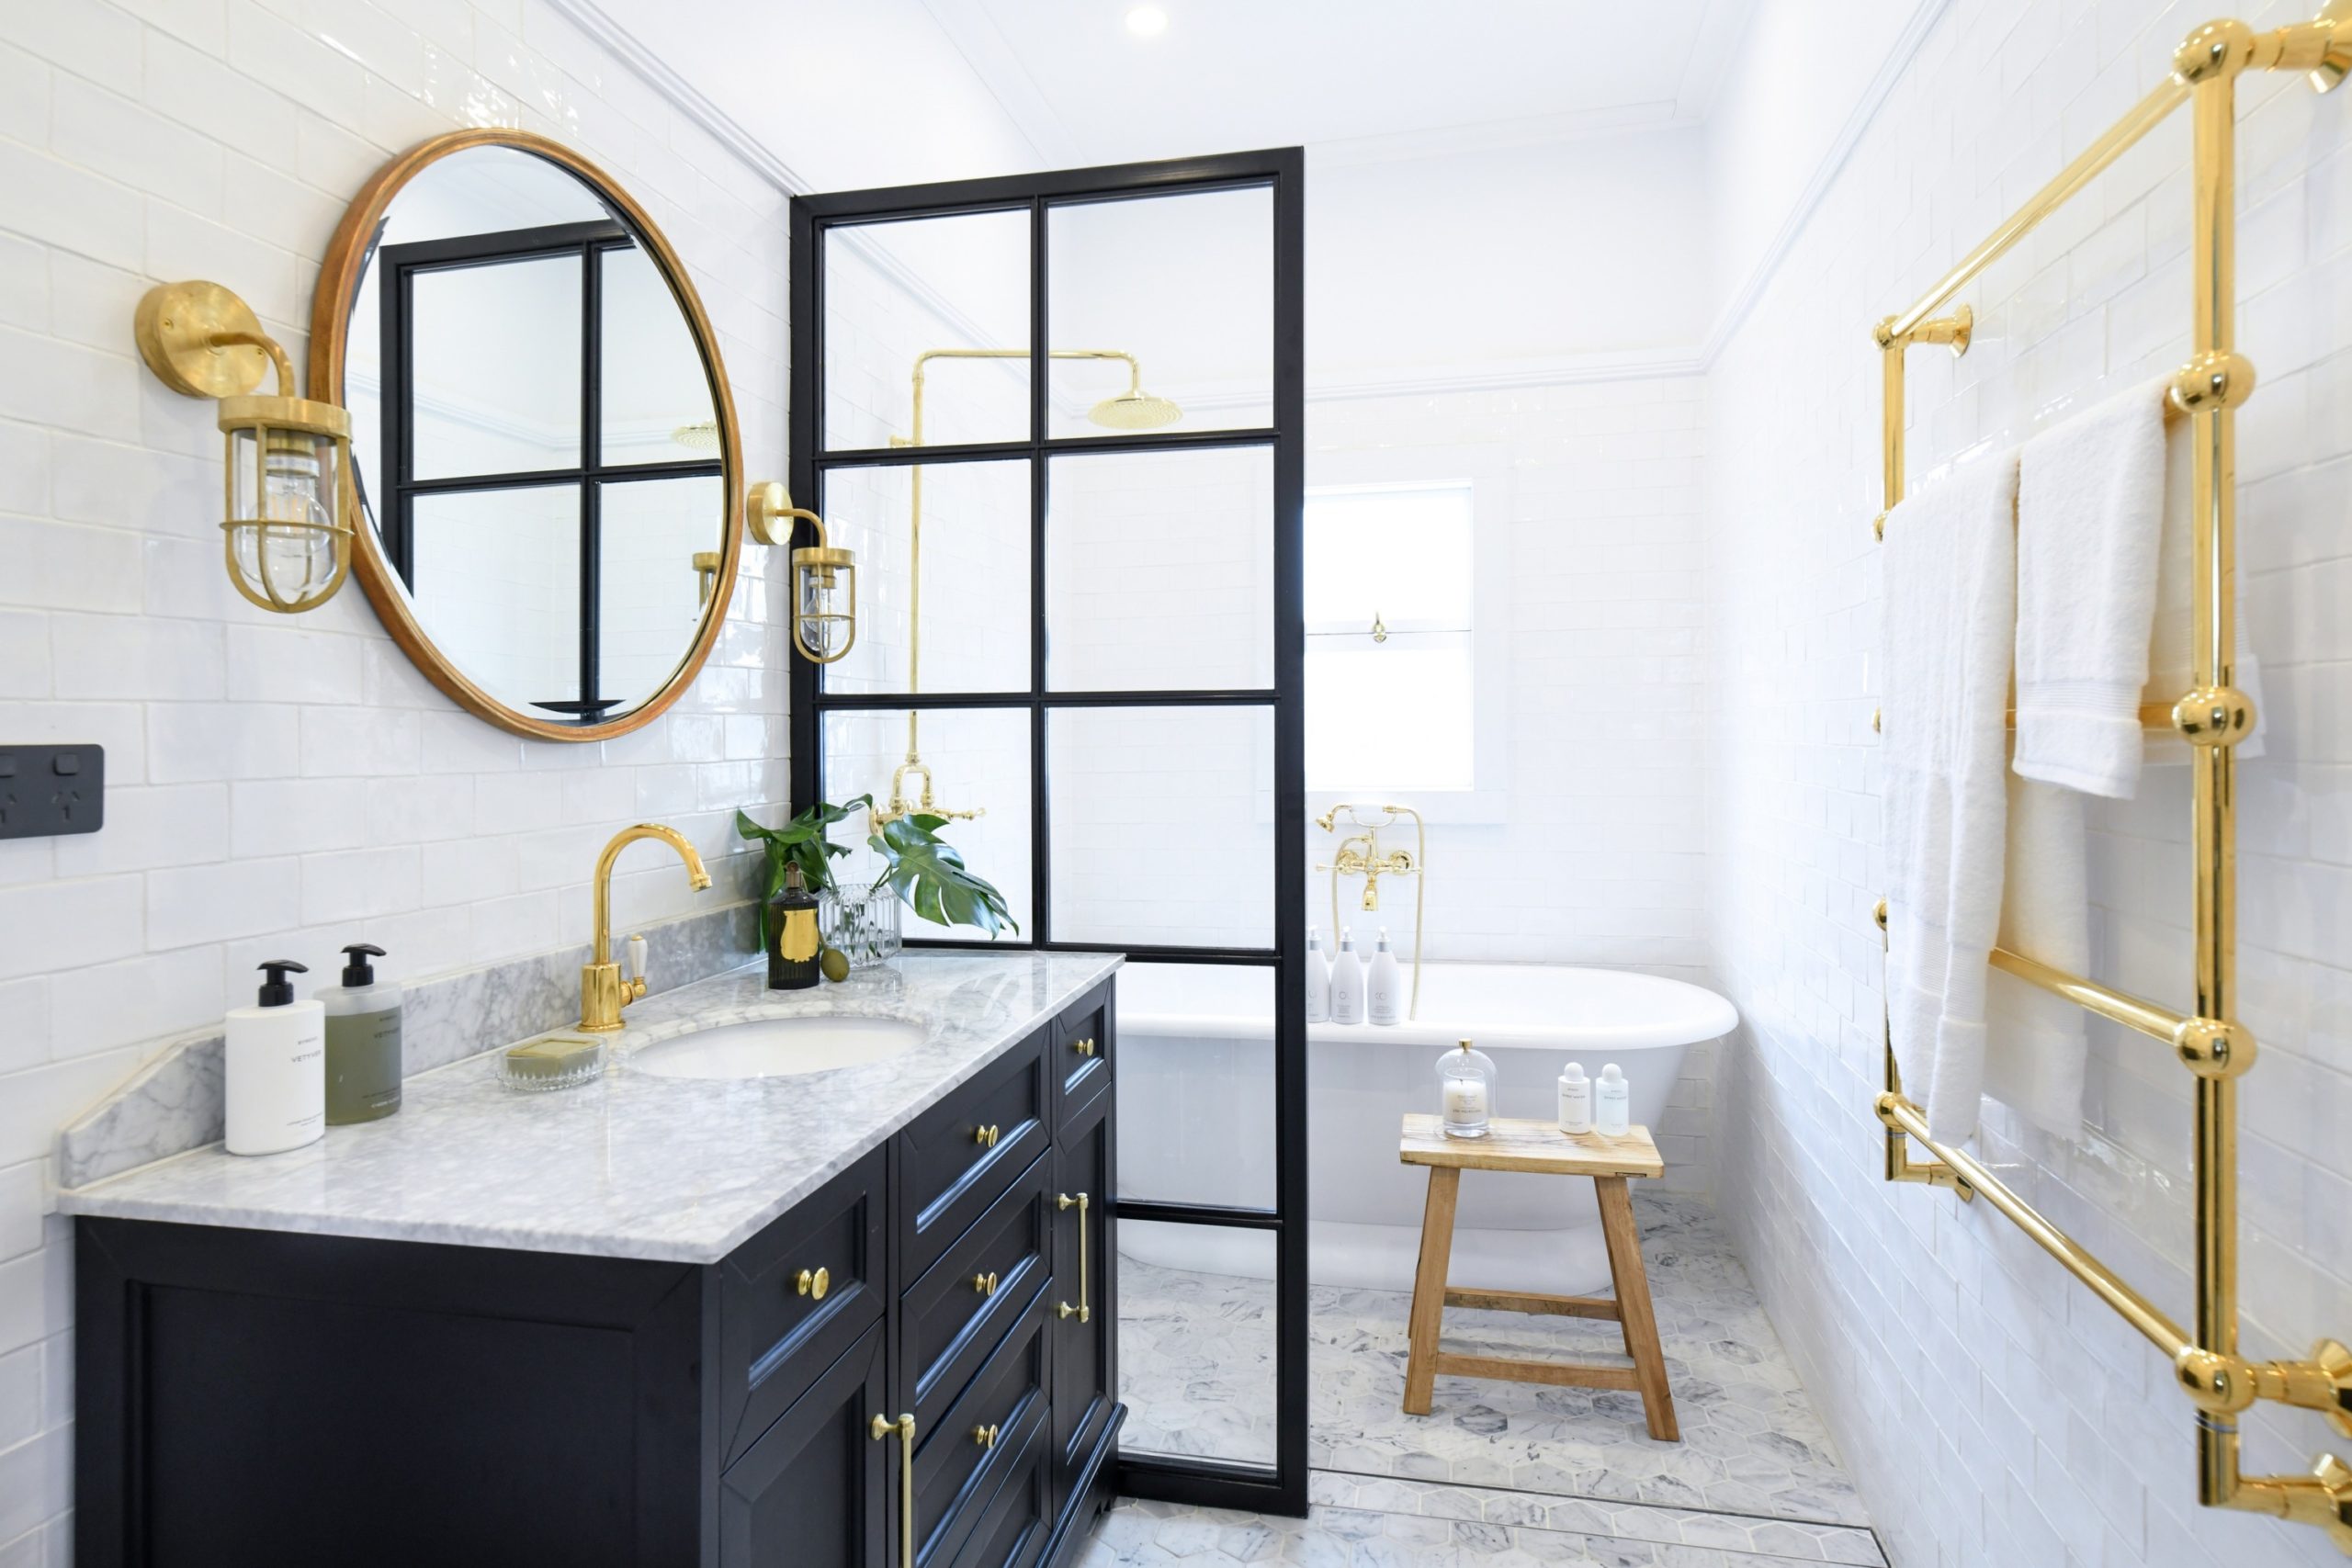 Metallic Accents.. scaled Best +60 Ideas to Enhance Your Bathroom’s Luxuriousness - 34